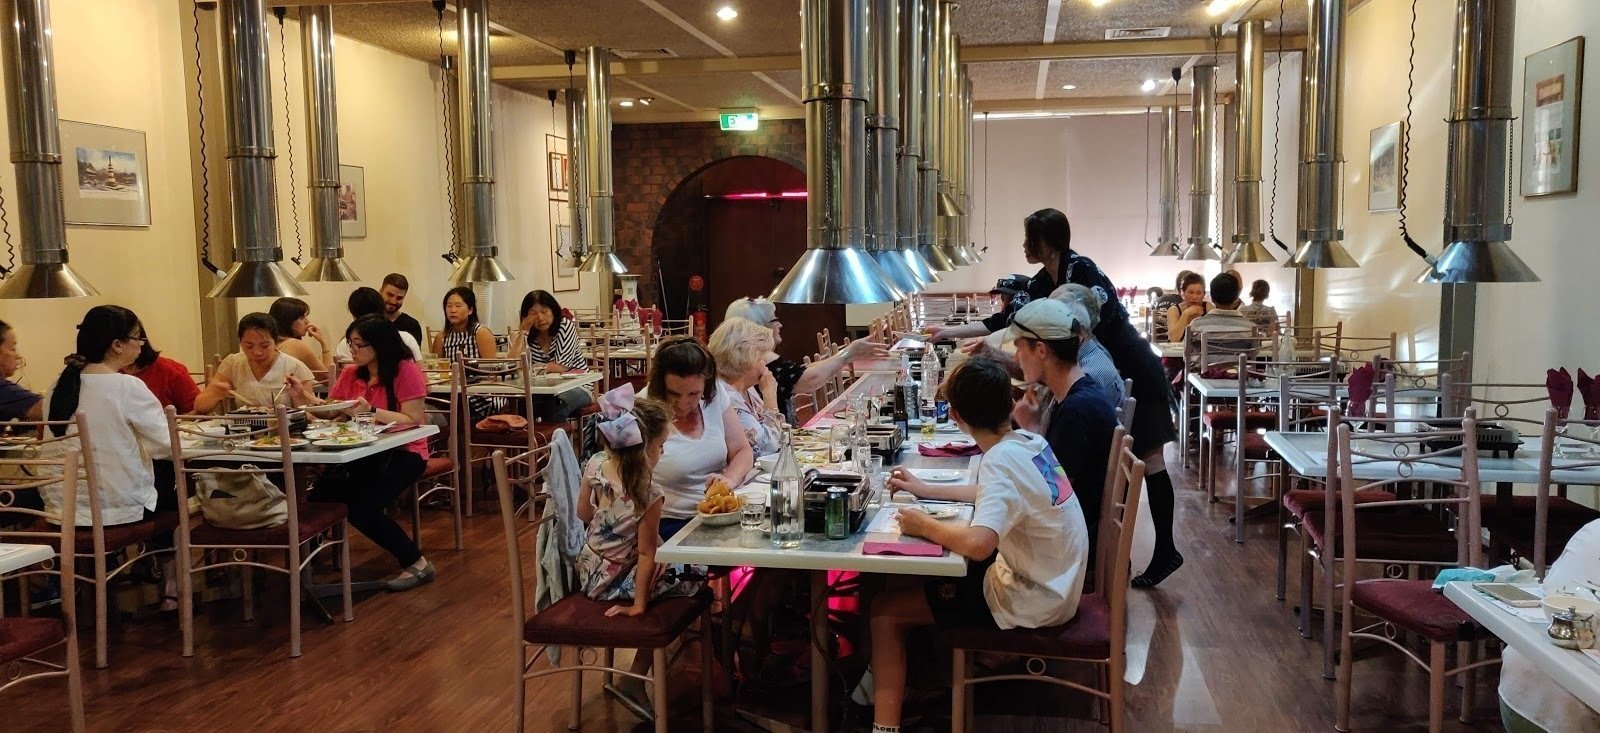 <span class="translation_missing" title="translation missing: en.meta.location_title, location_name: Korea Restaurant, city: Adelaide">Location Title</span>